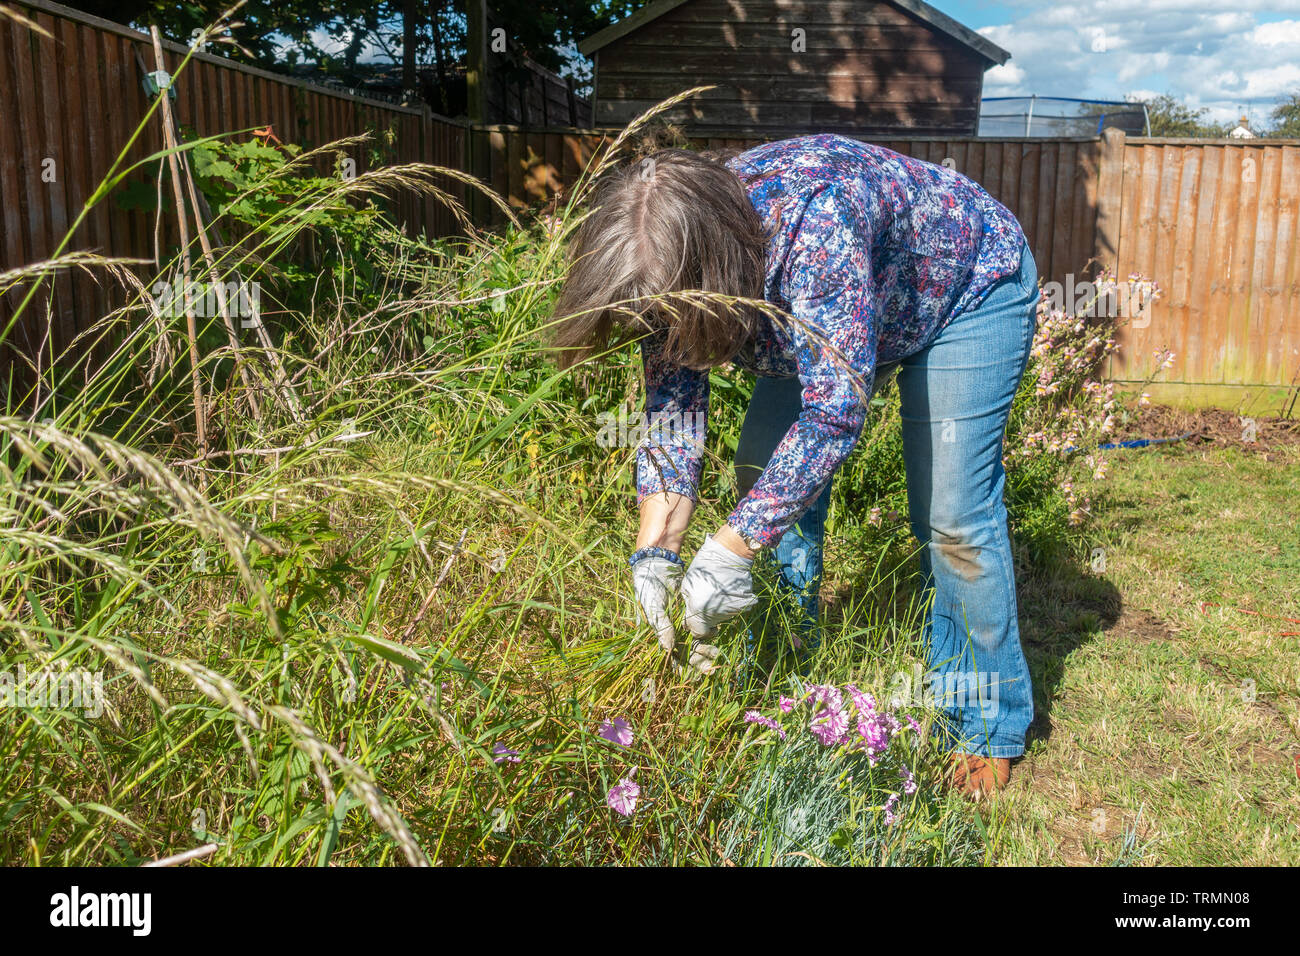 A lady doing weeding in a residential garden. Stock Photo